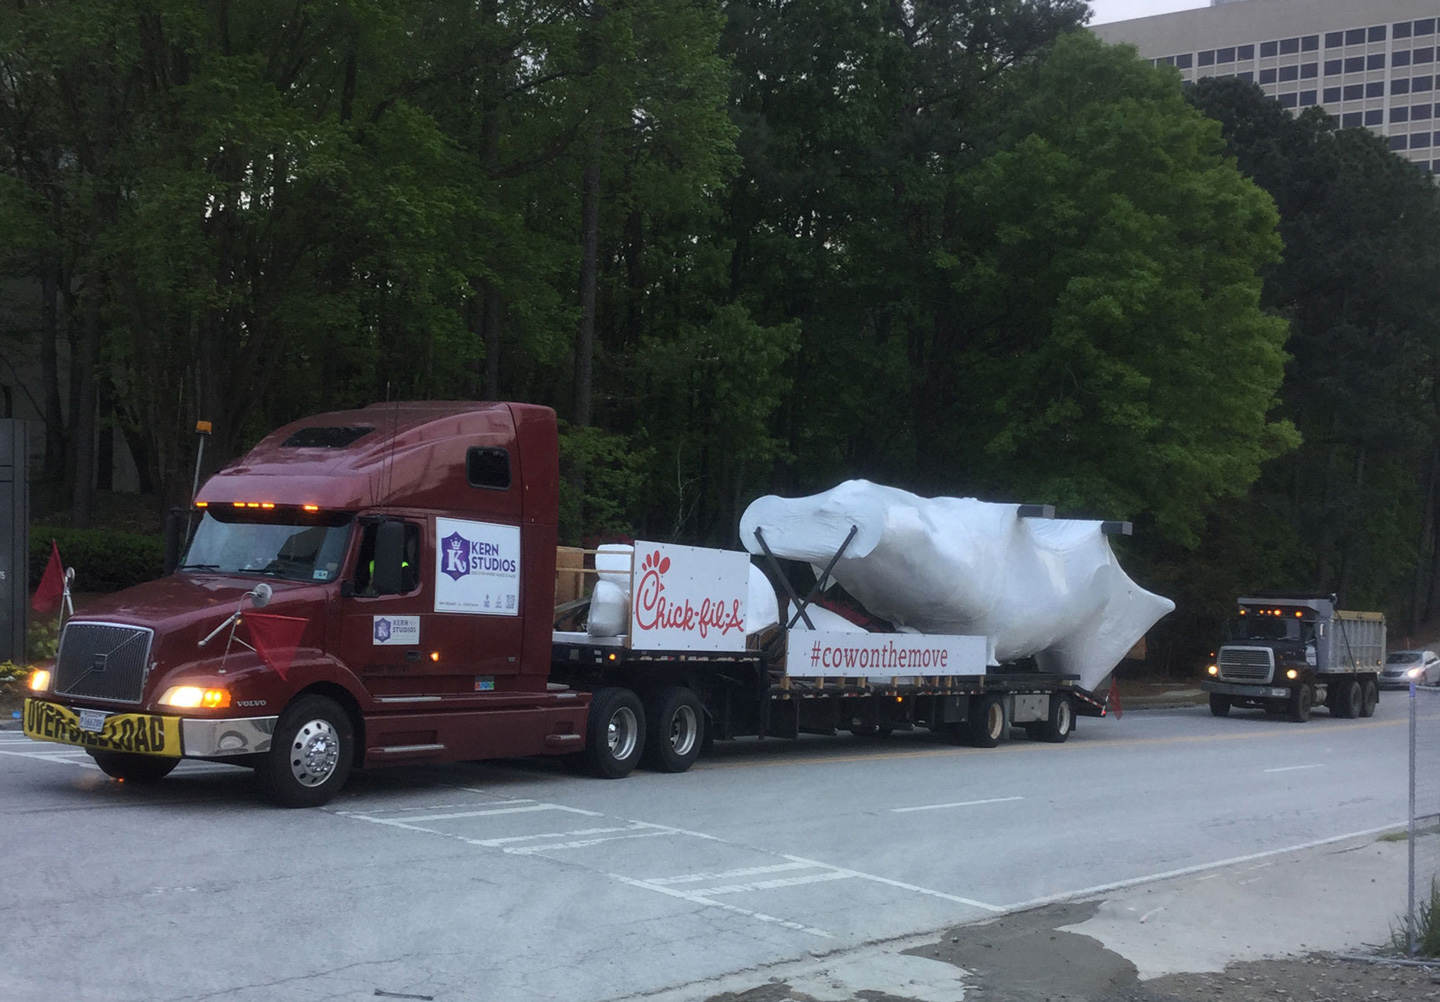 The Chick-fil-A Cow makes its trek back to Atlanta from Kern Studios in New Orleans.